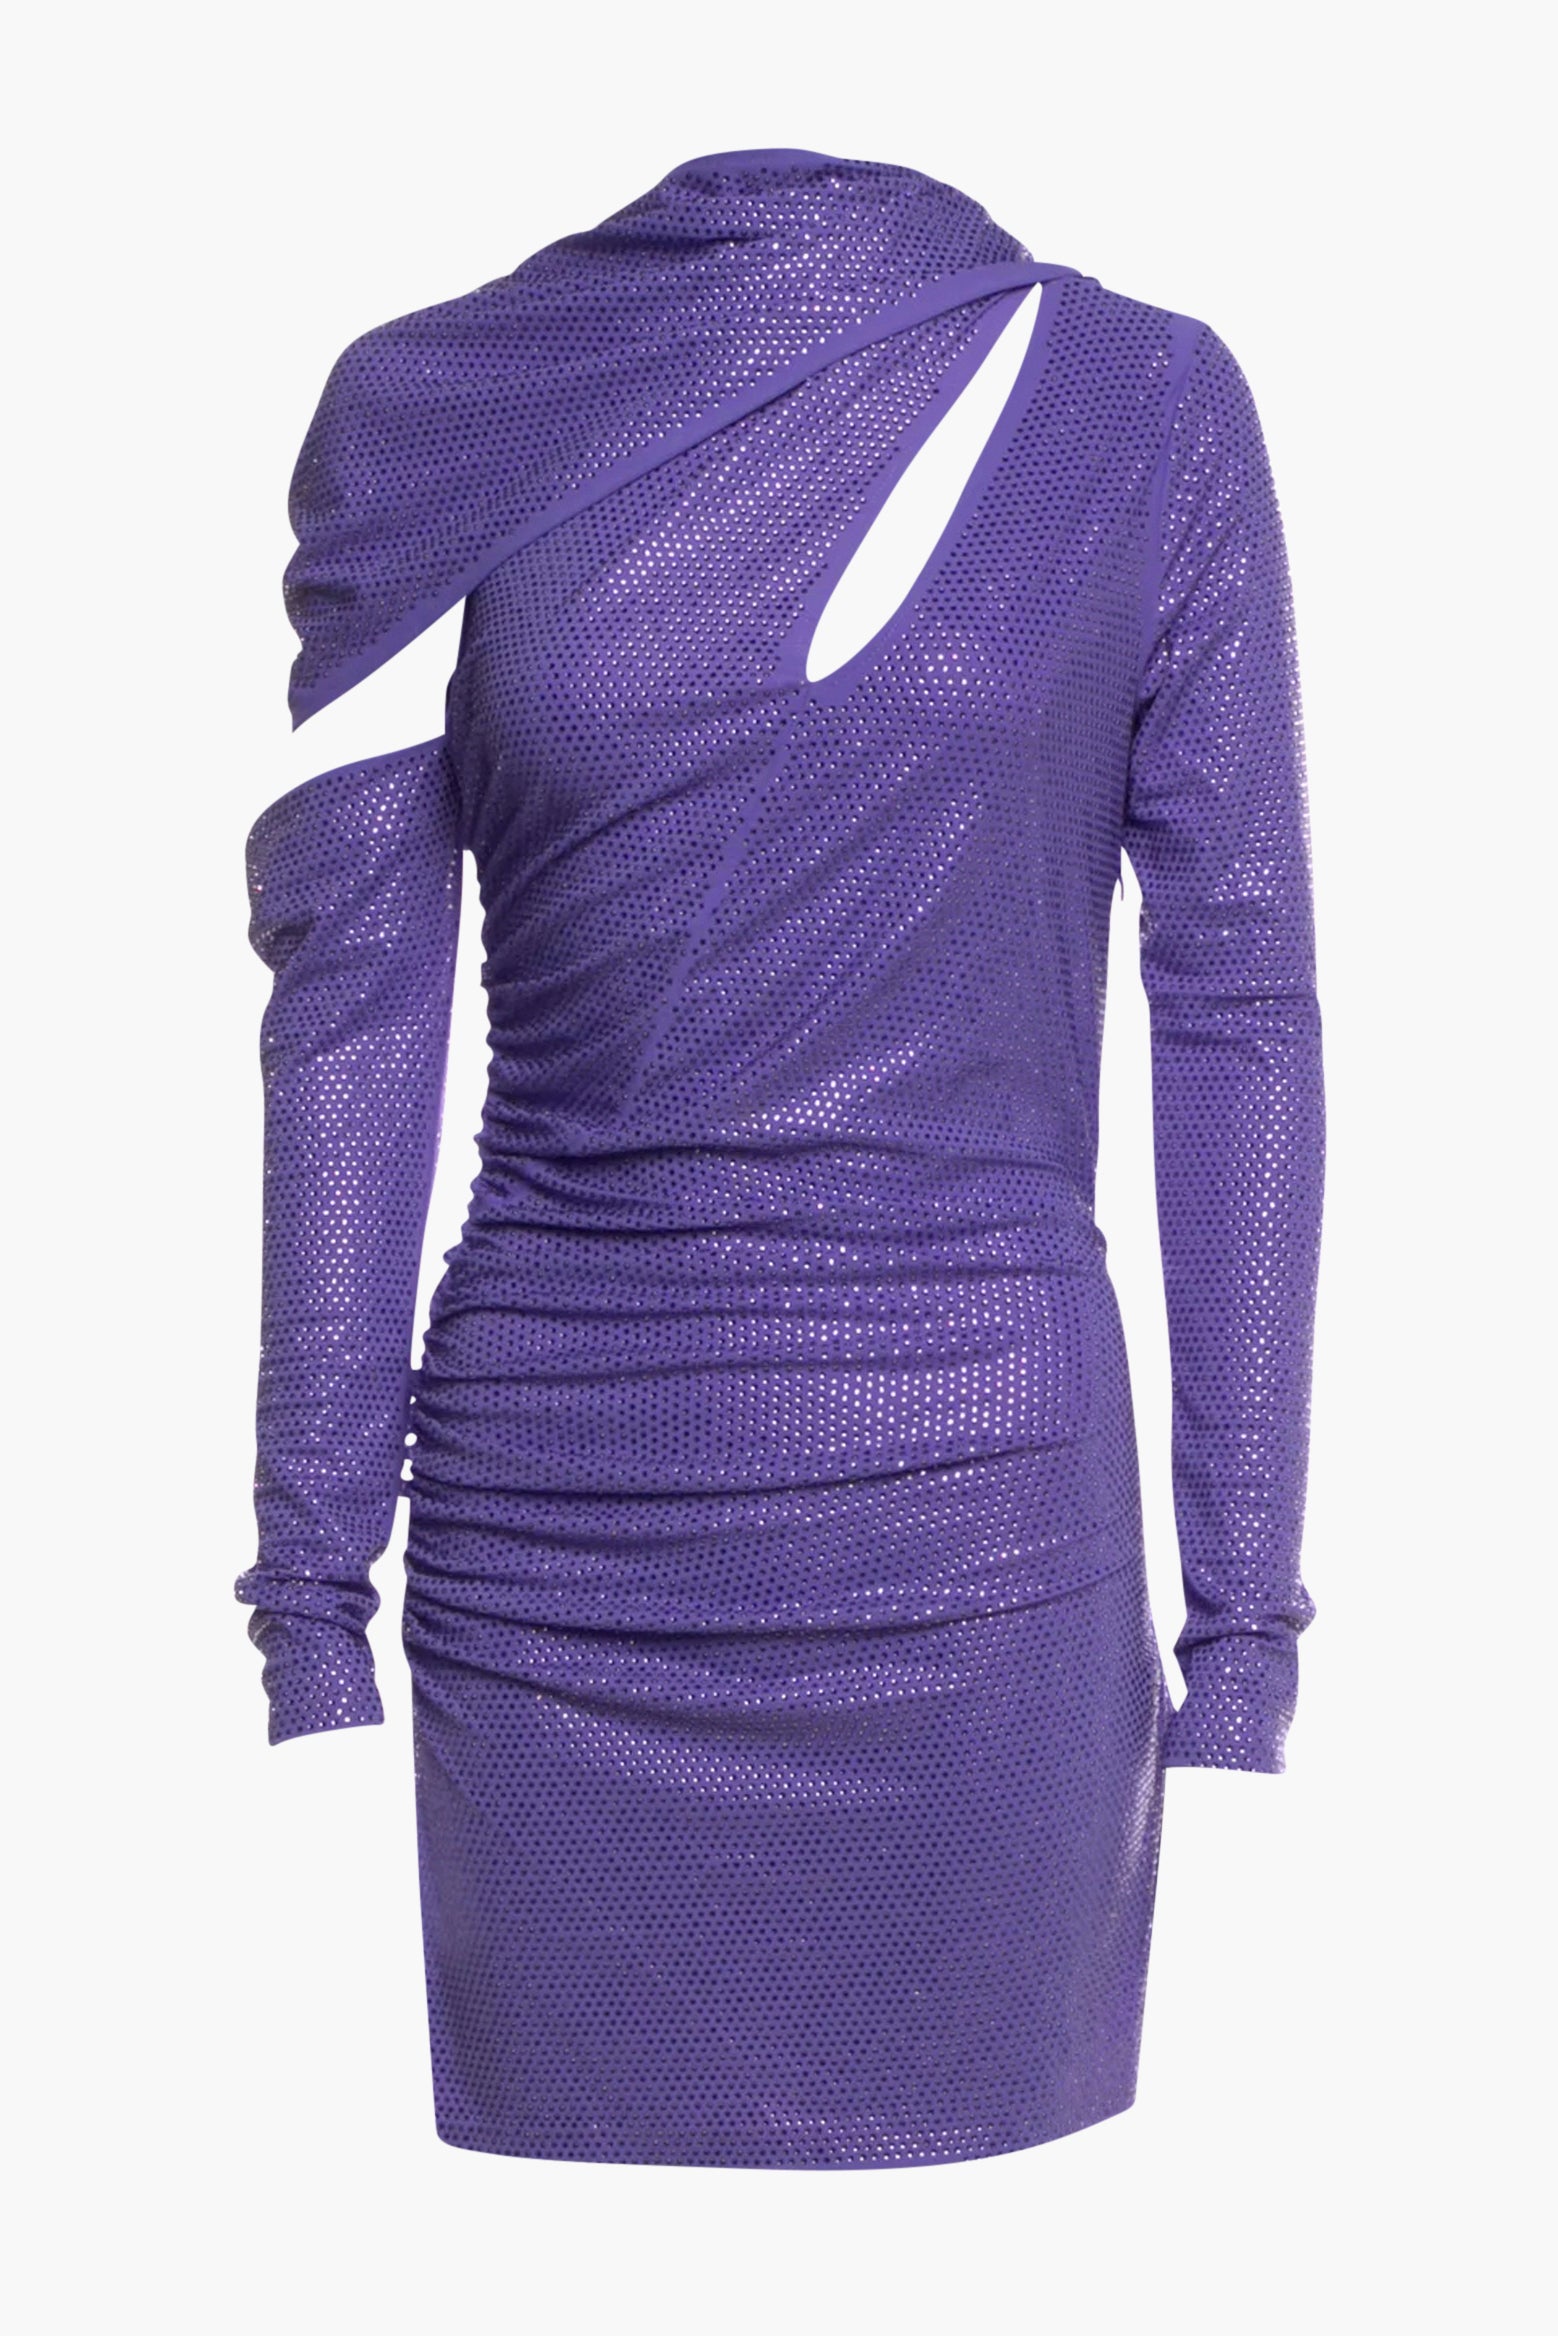 Cult Gaia Nicole Dress in Amethyst available at The New Trend